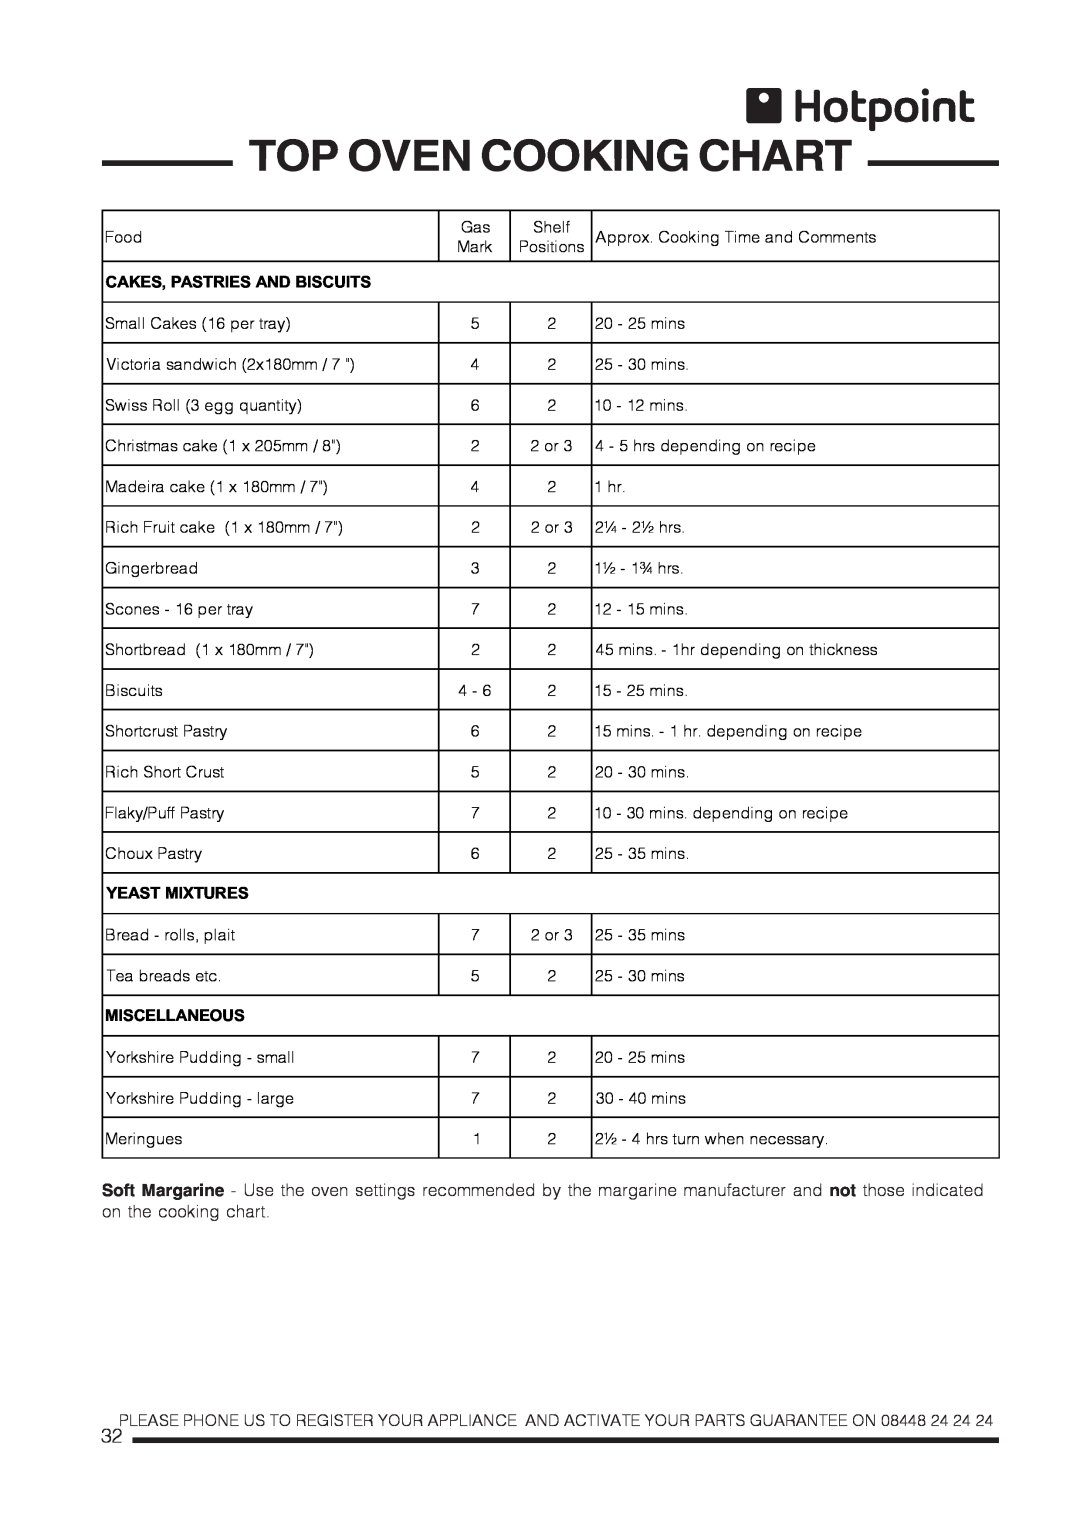 Hotpoint CH60GTCF, CH60GTXF installation instructions Top Oven Cooking Chart 